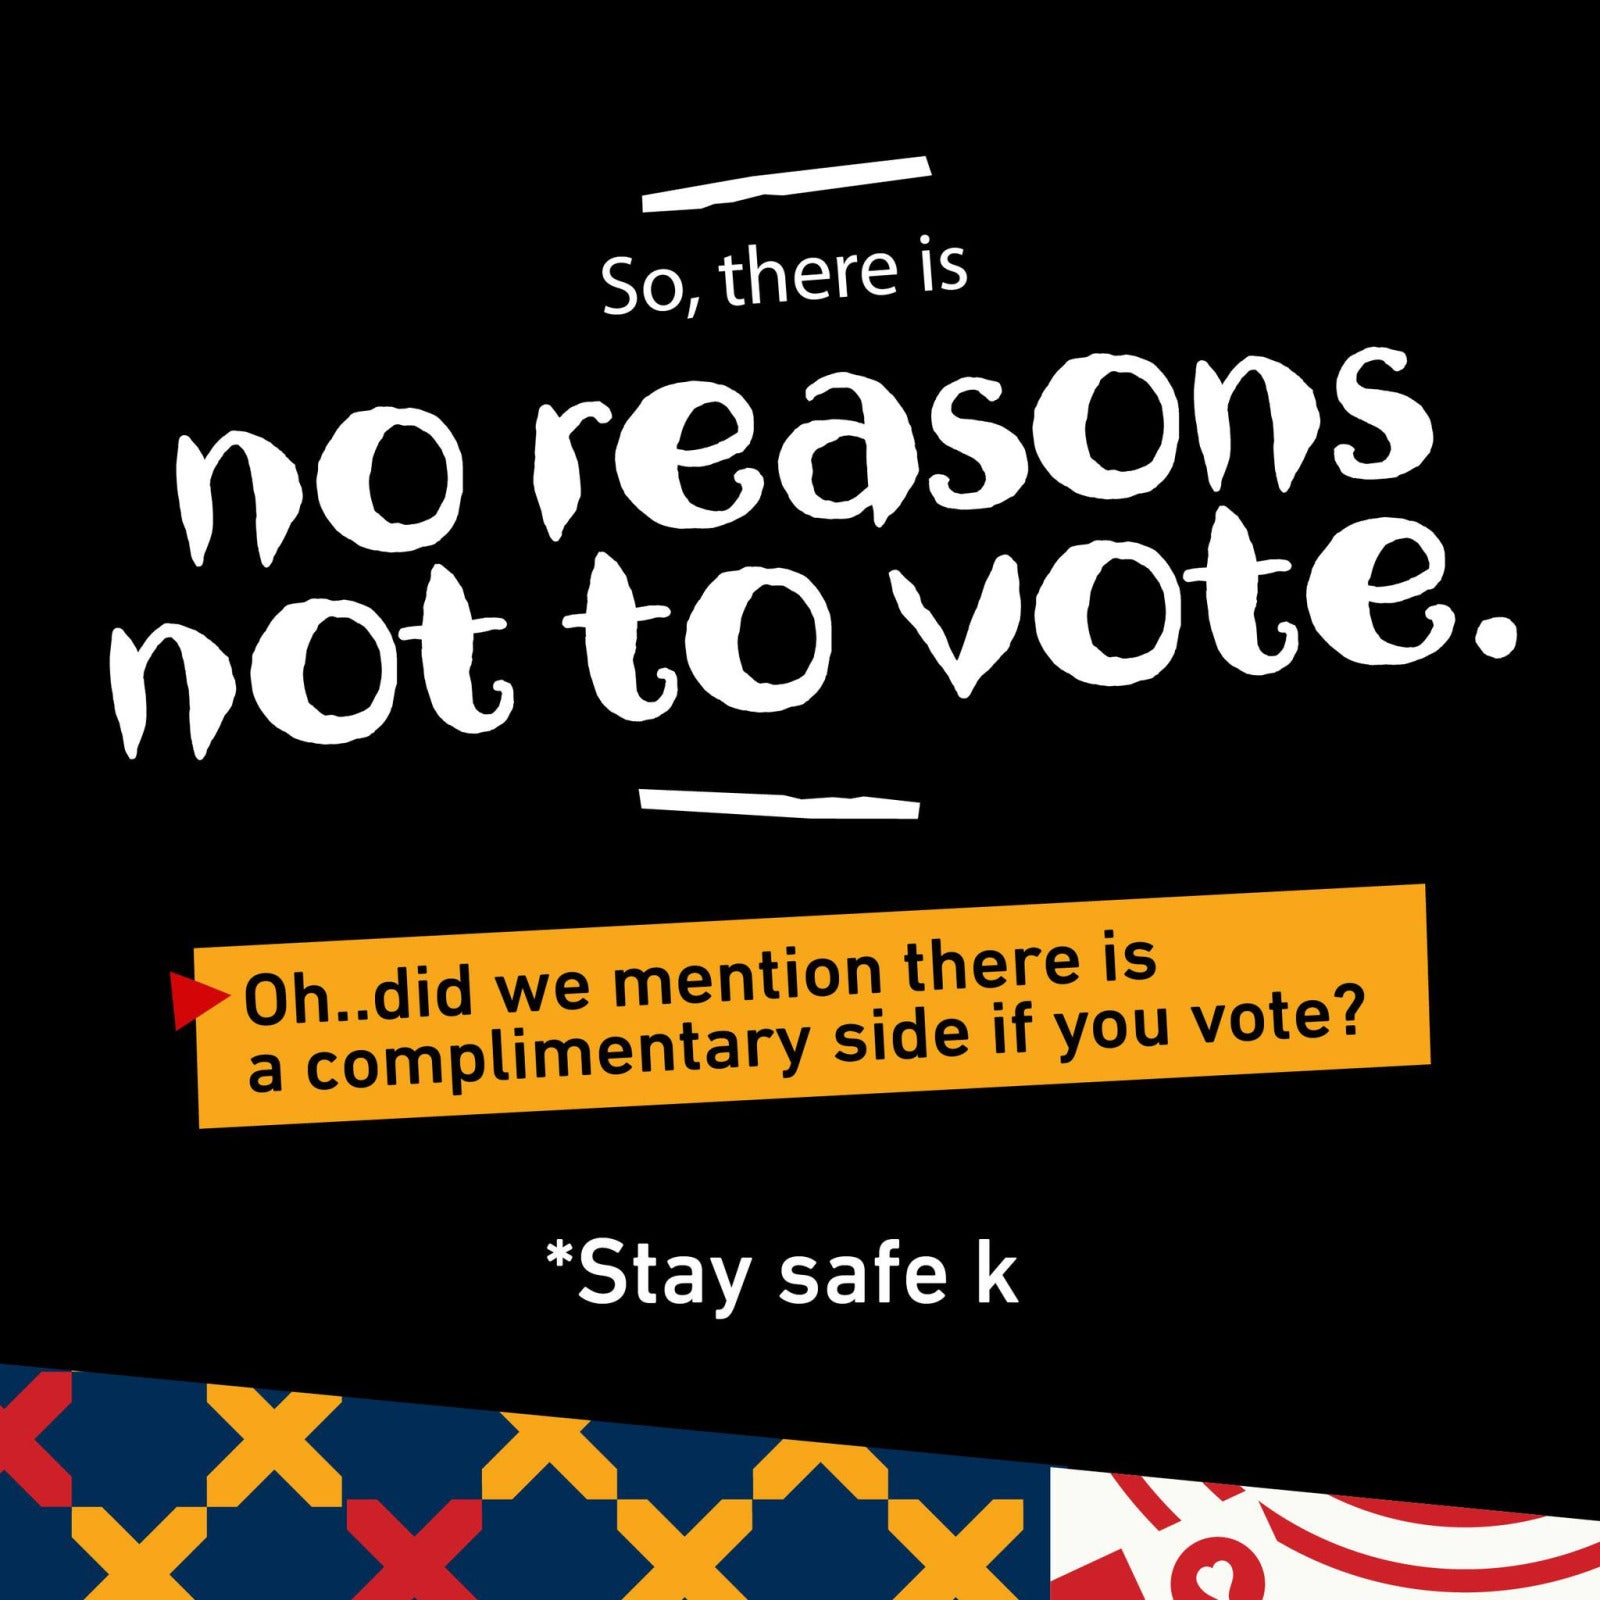 Nandos 1119 Voting Day Promotion Free Side Scaled